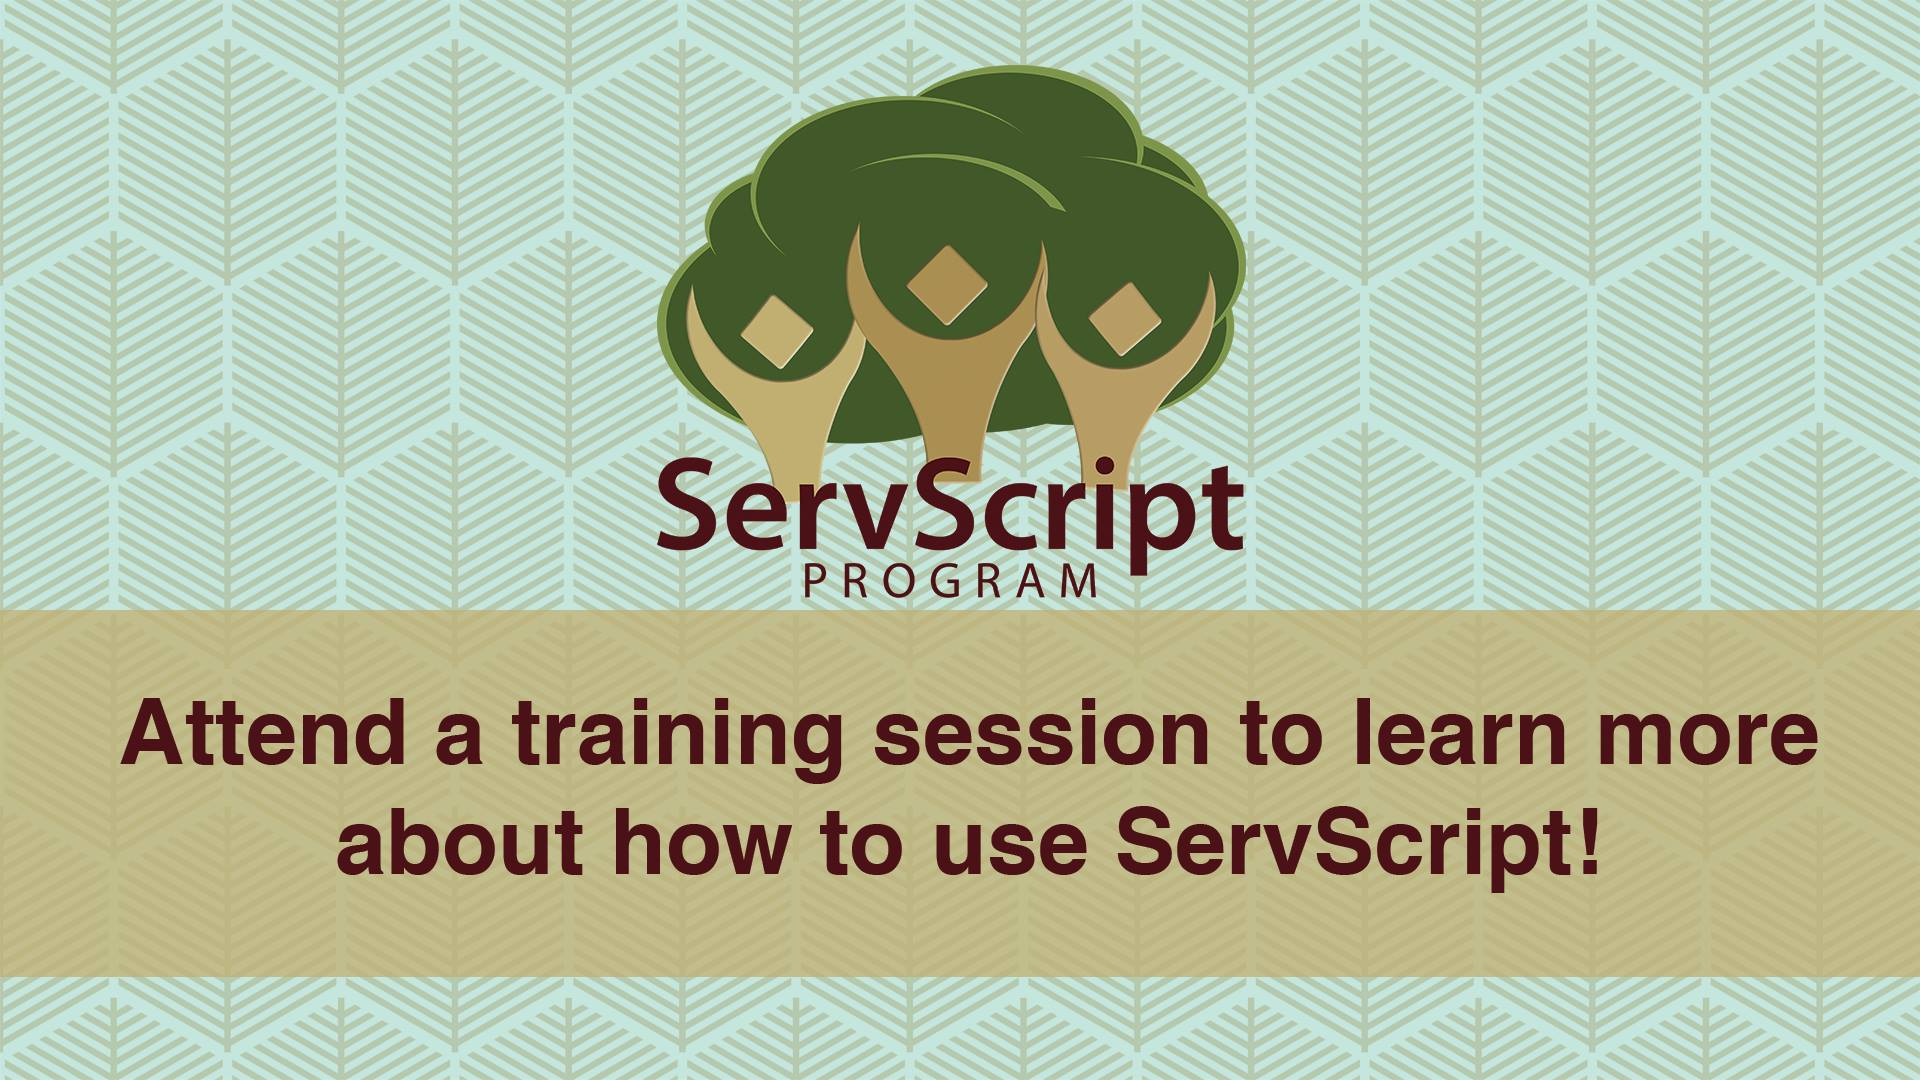 ServScript Program: Attend a training session to learn more about how to use ServScript!